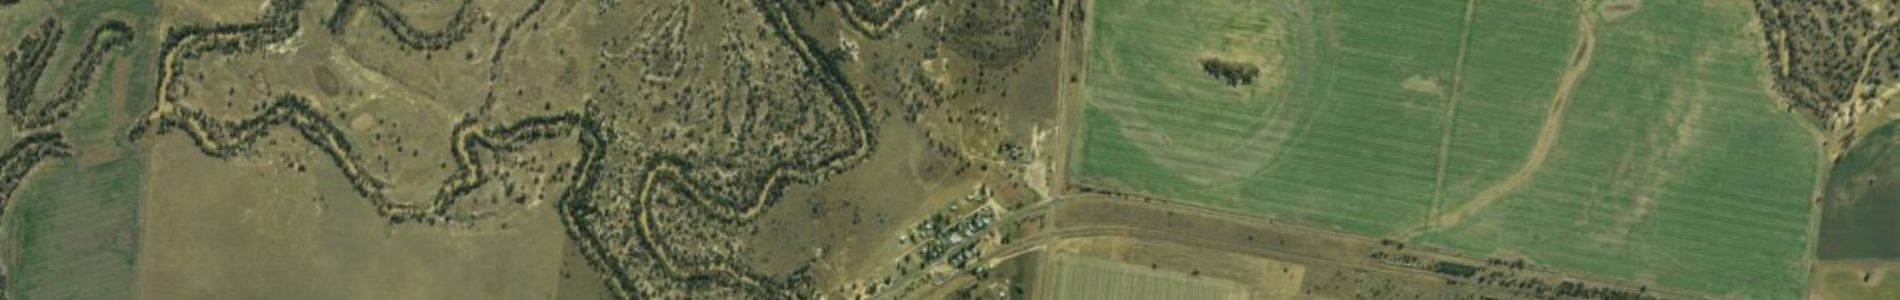 aerial view of Toobeah and part of Toobeah Reserve